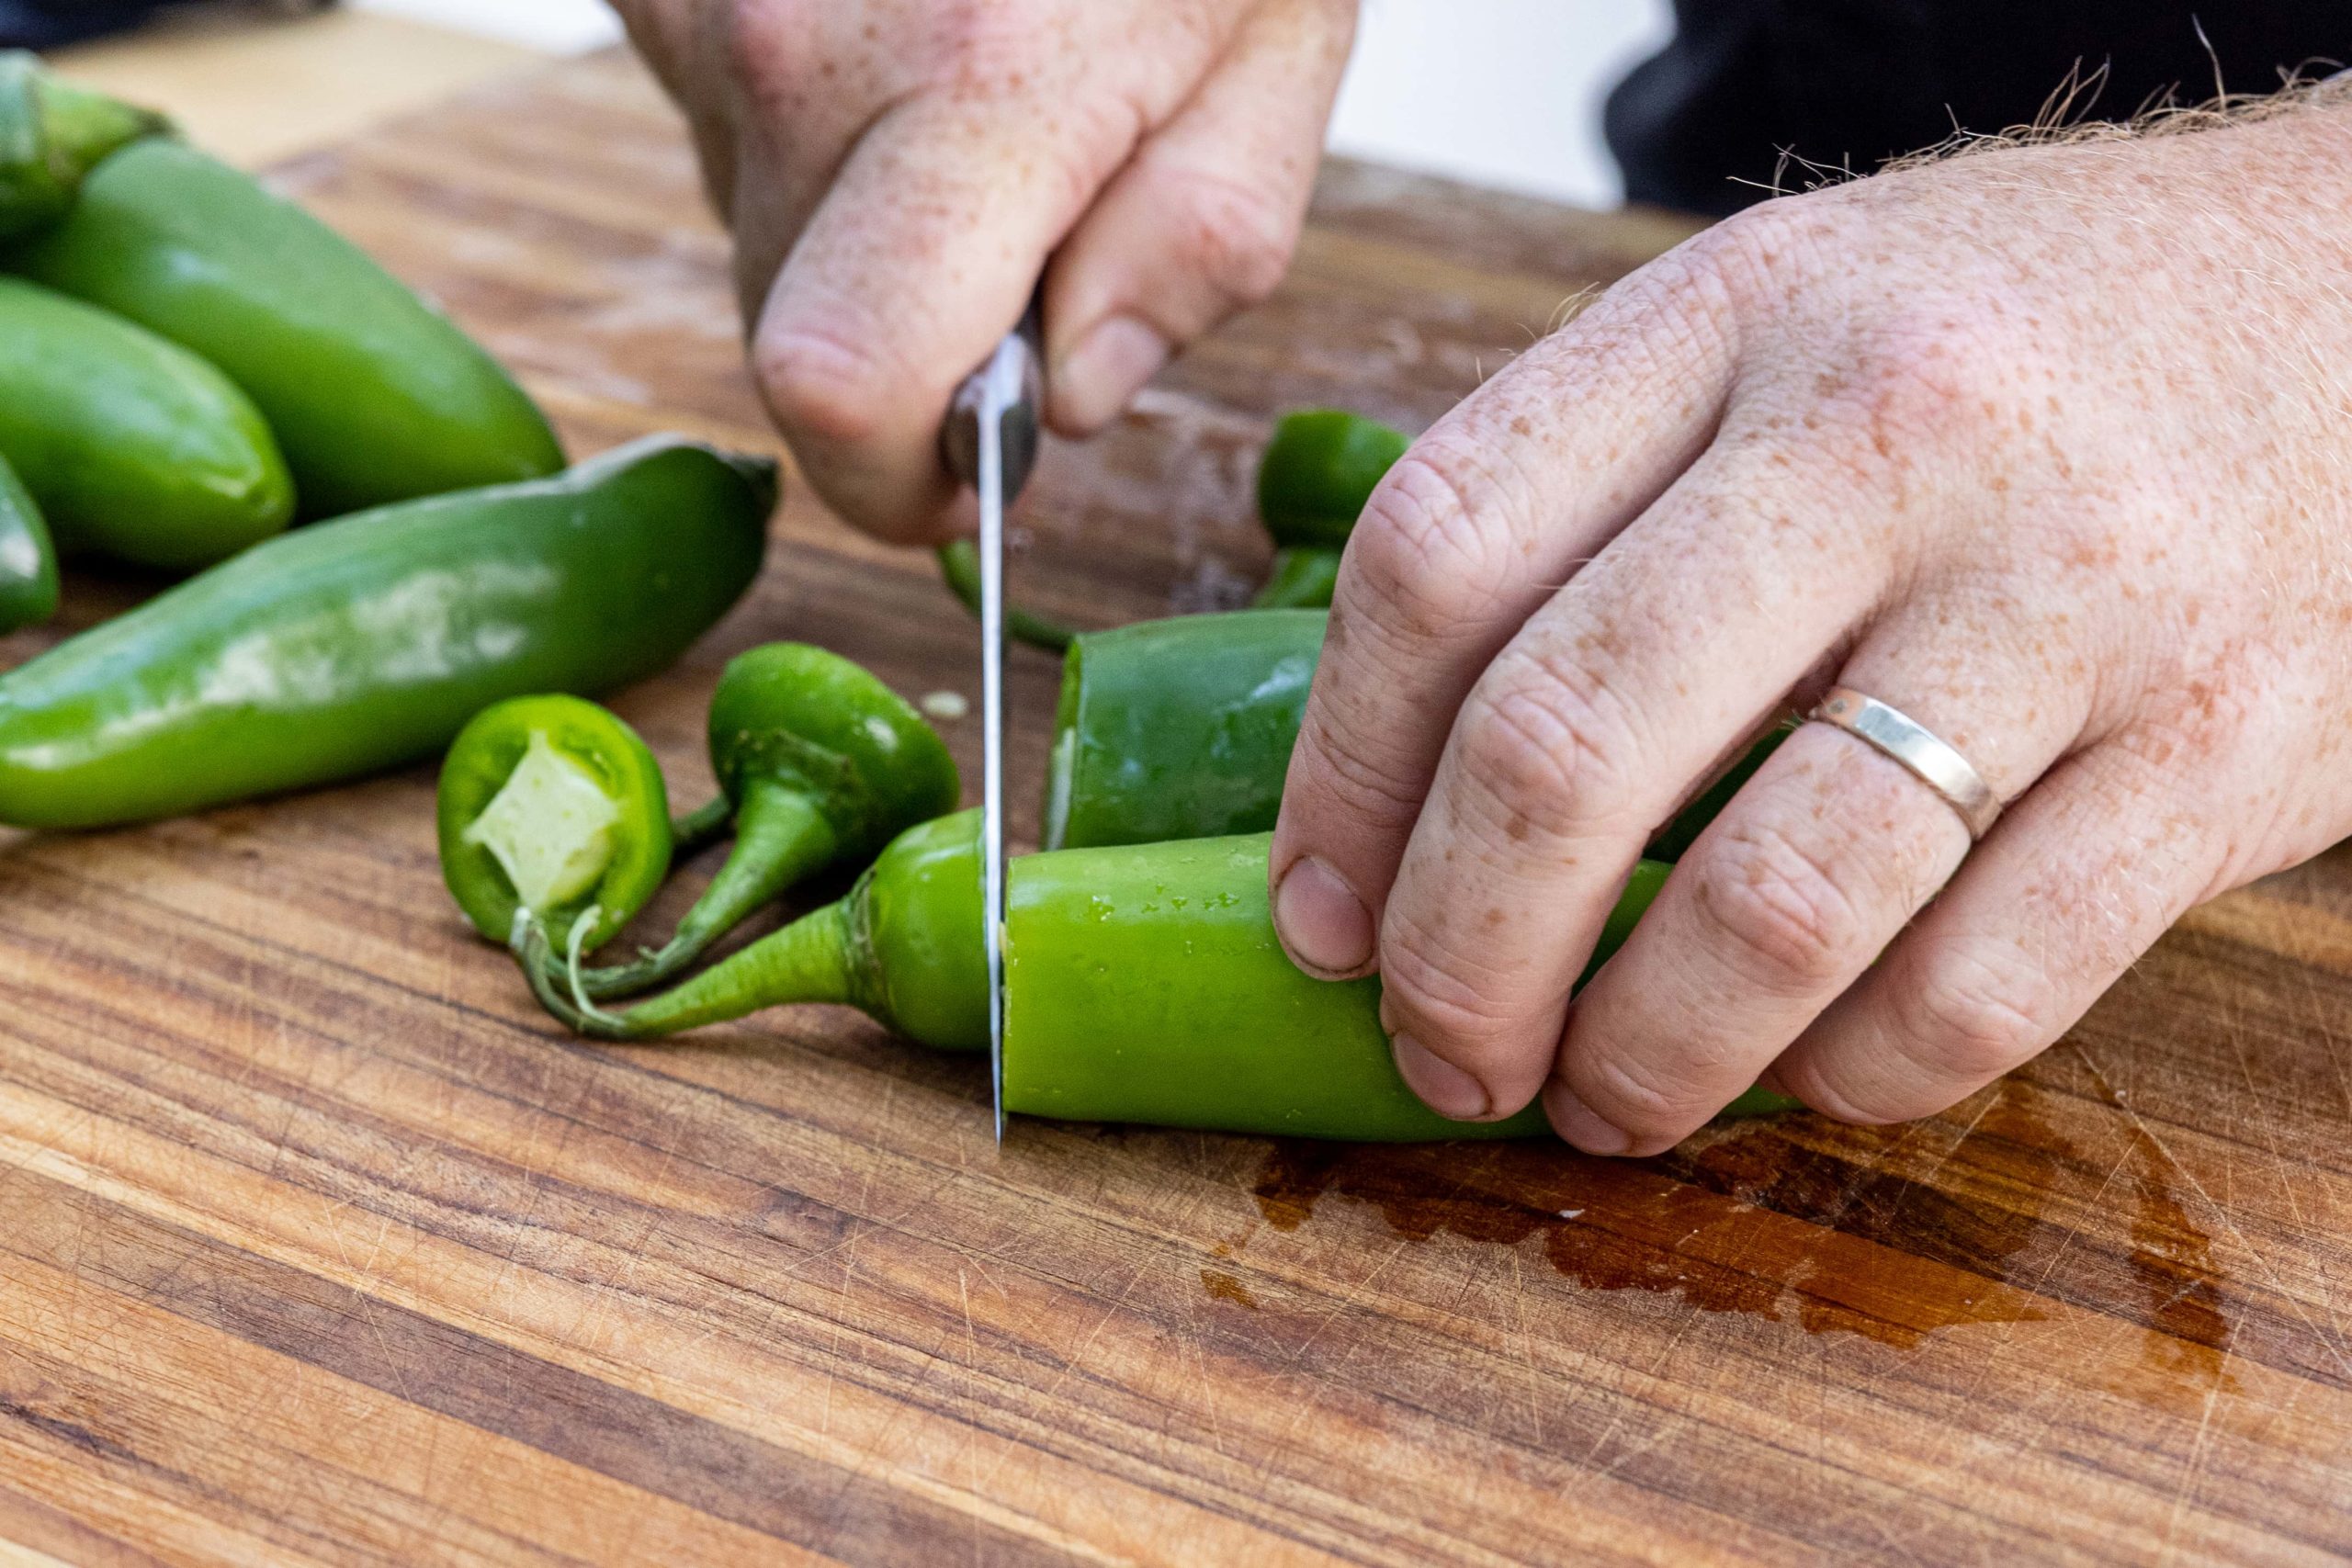 Cutting the tops from the peppers